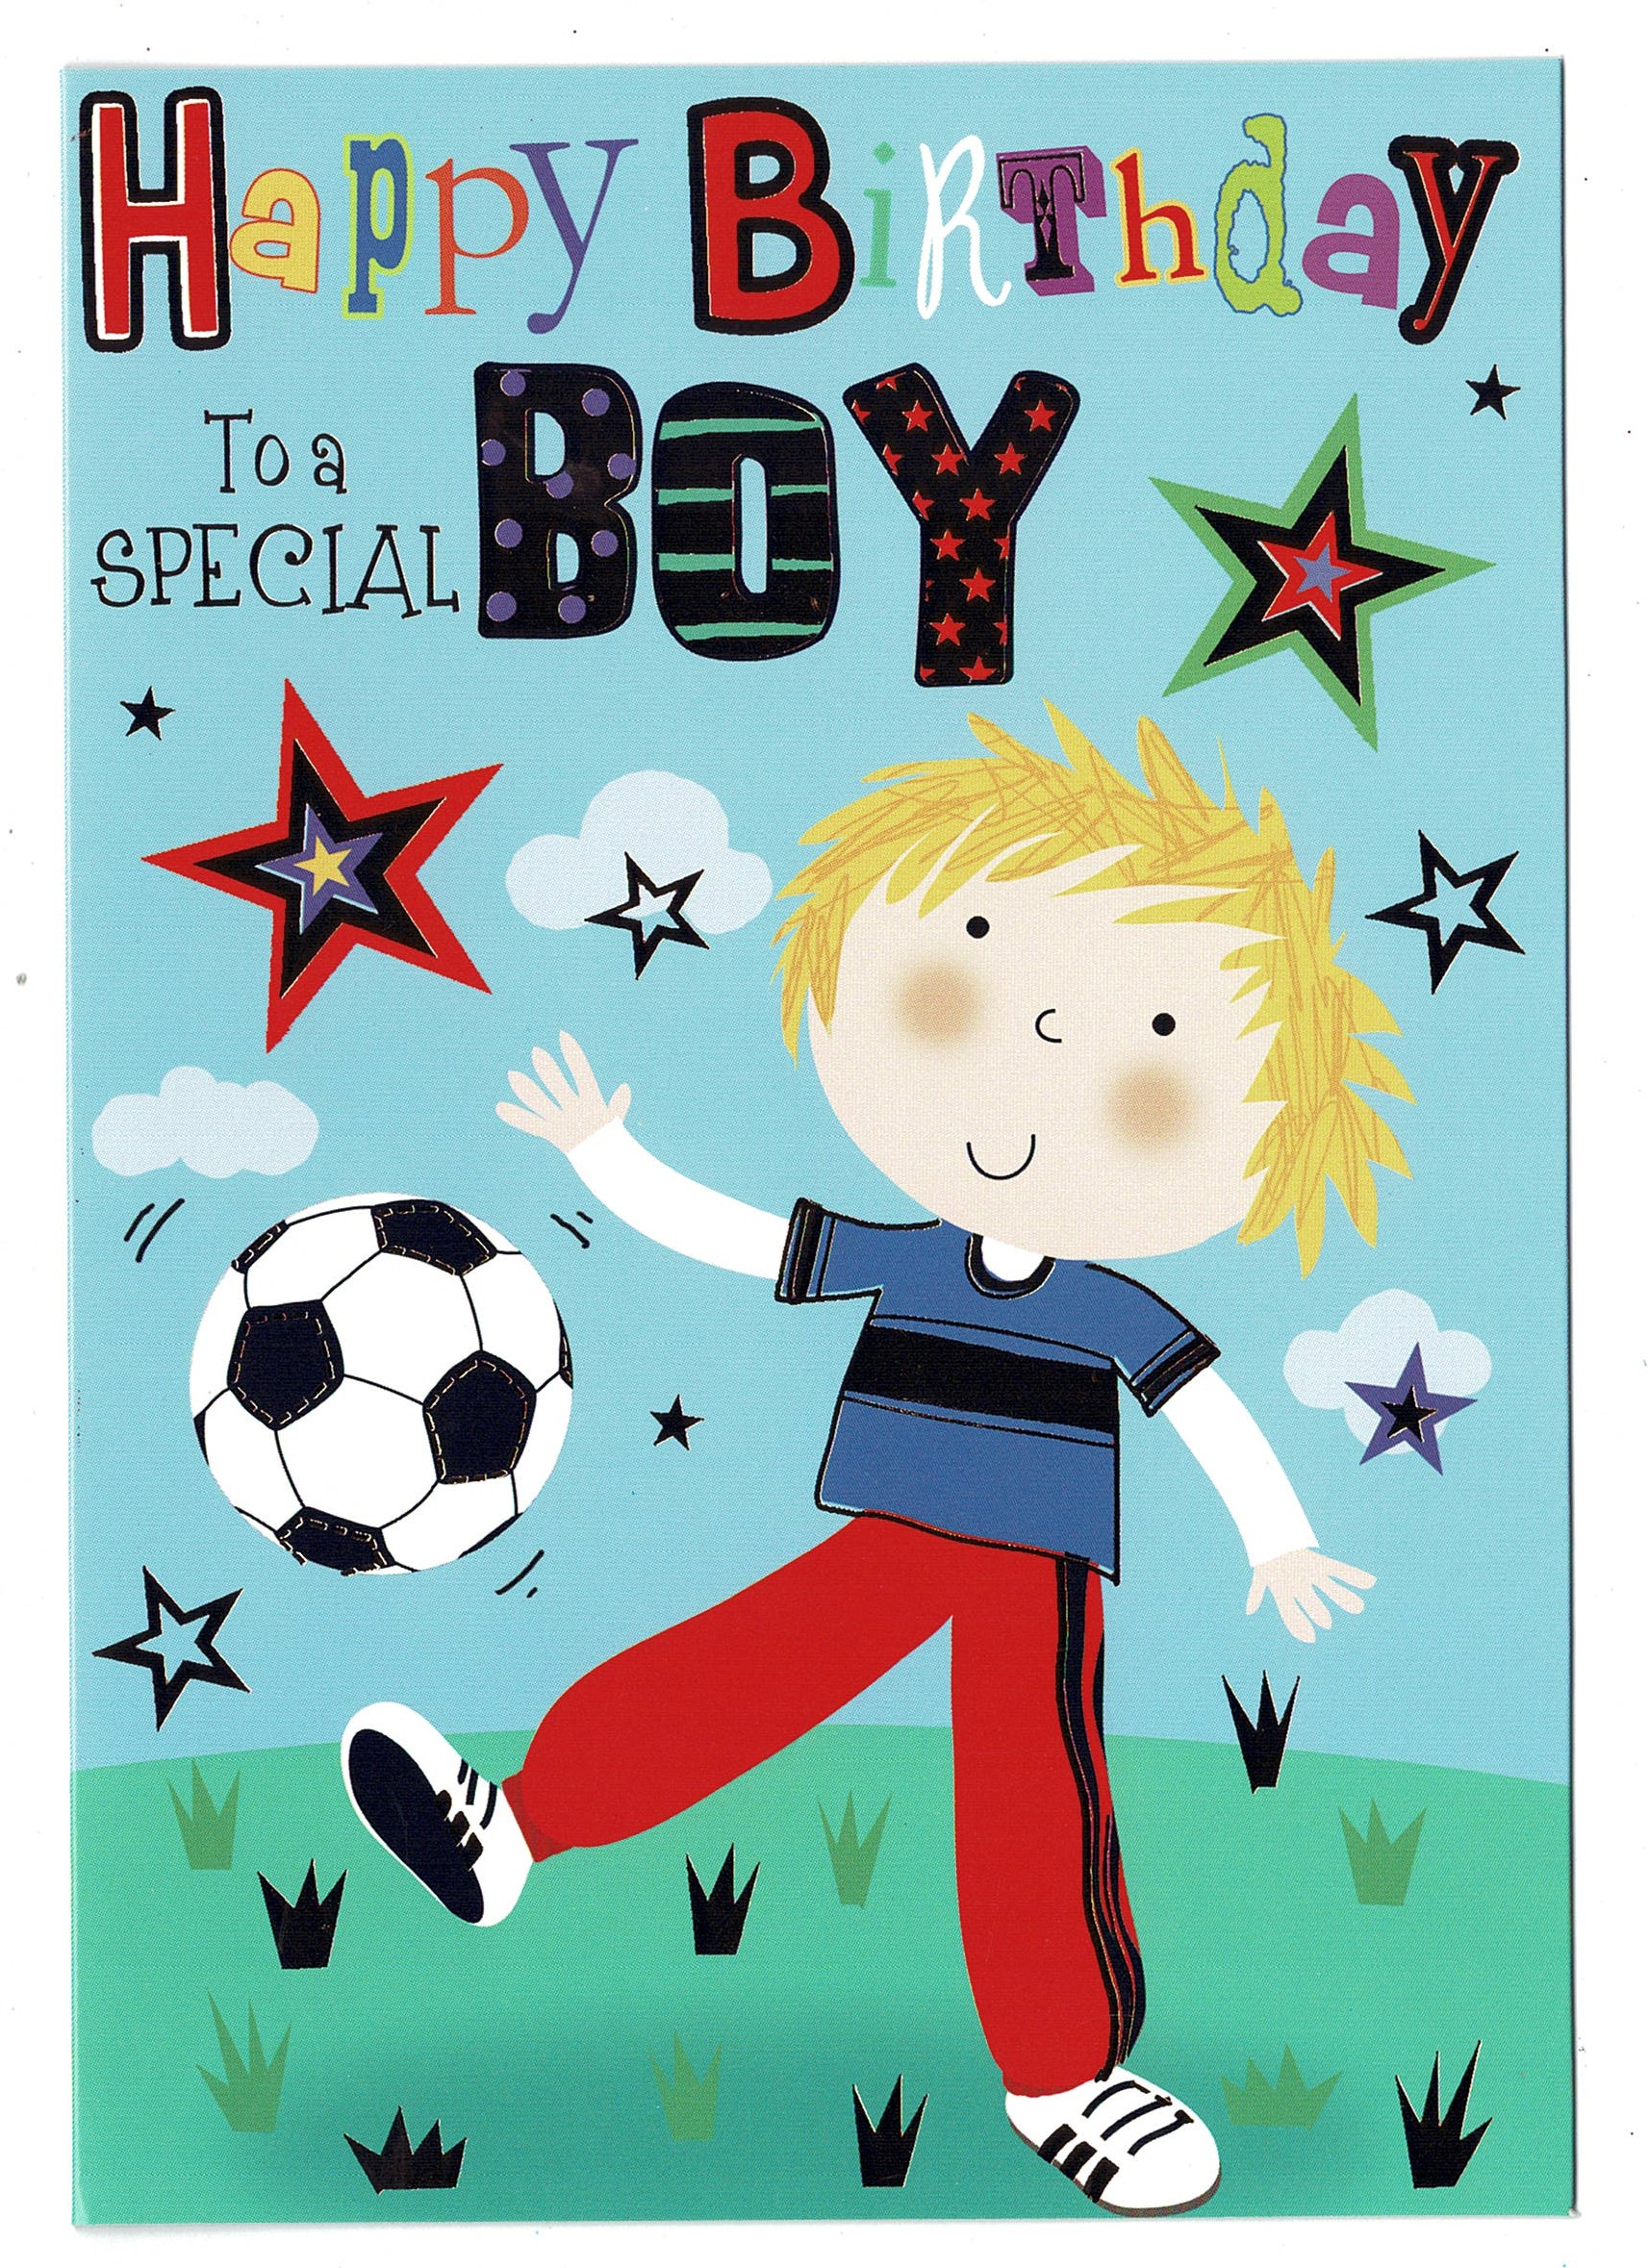 General Birthday Card Juvenile Design For Boys 'Happy Birthday To A ...